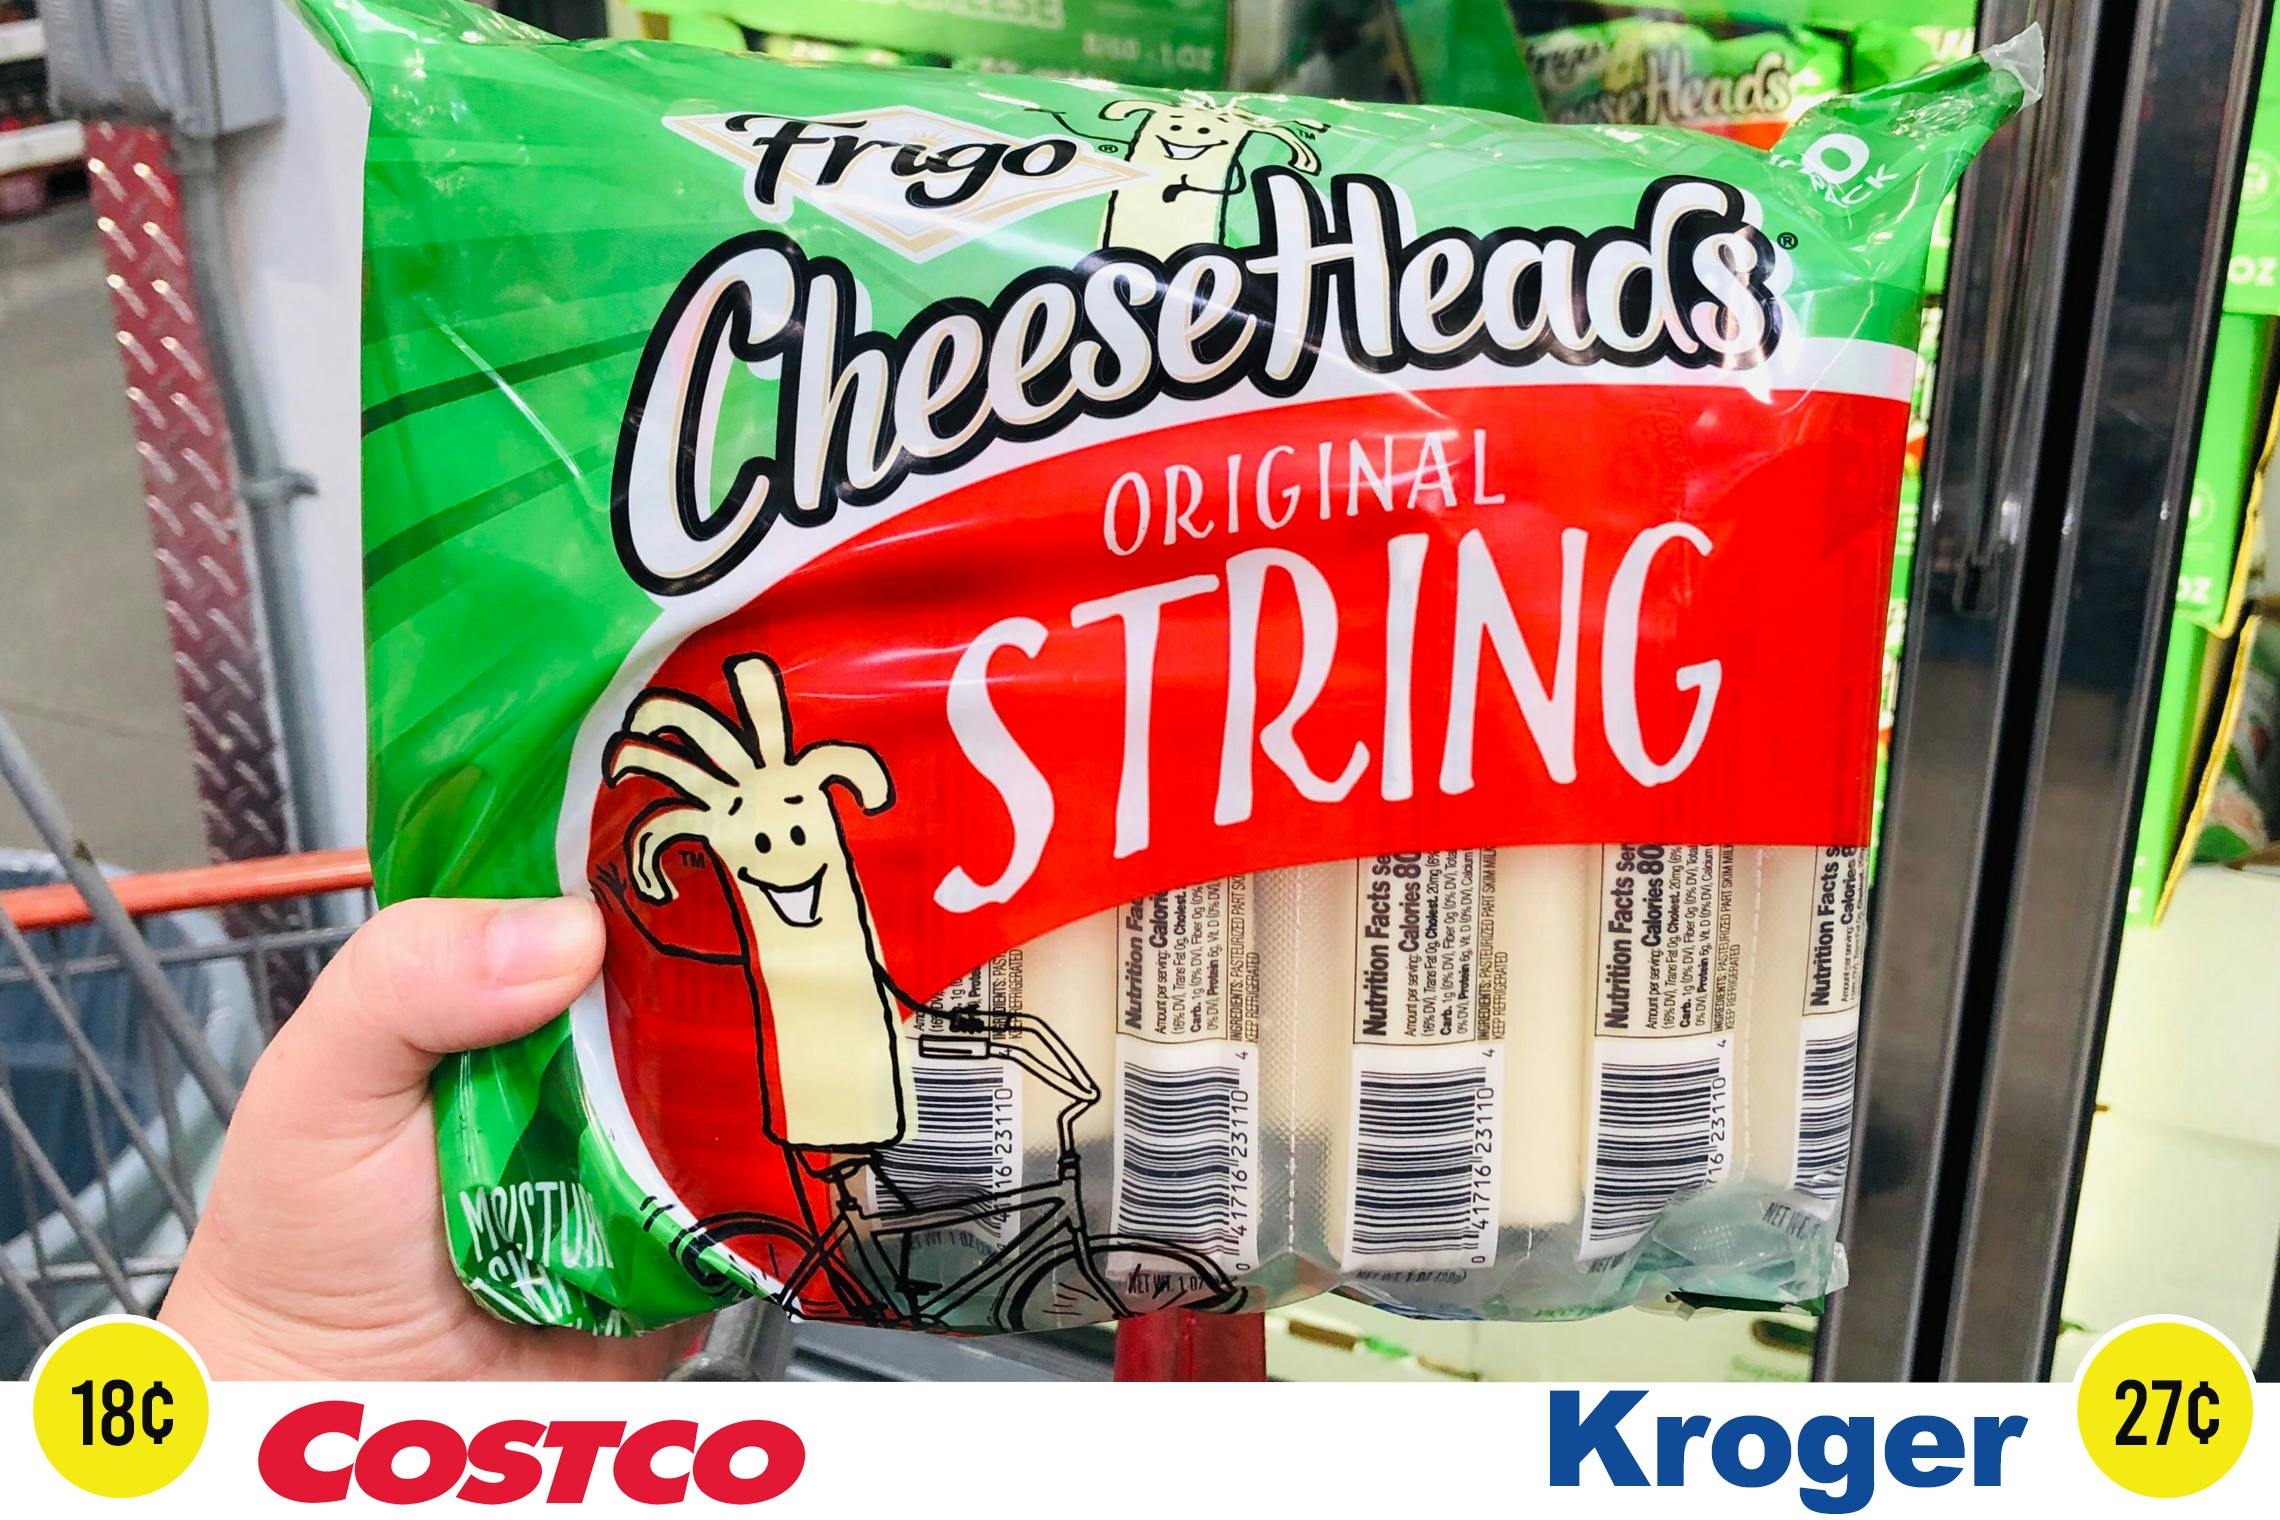 Cheeseheads string cheese at Costco